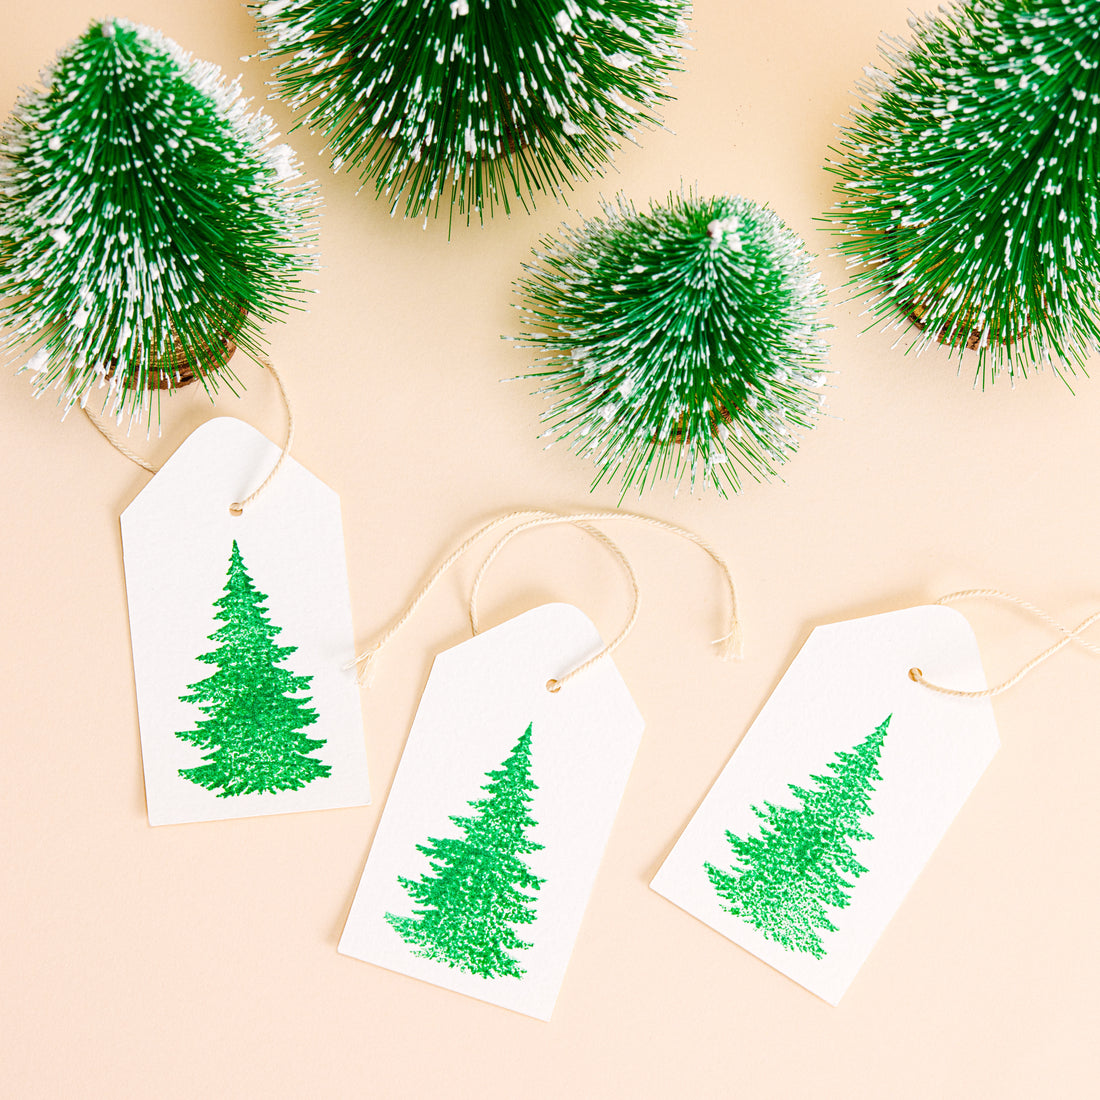 Pine Tree Gift Tags by Gifted